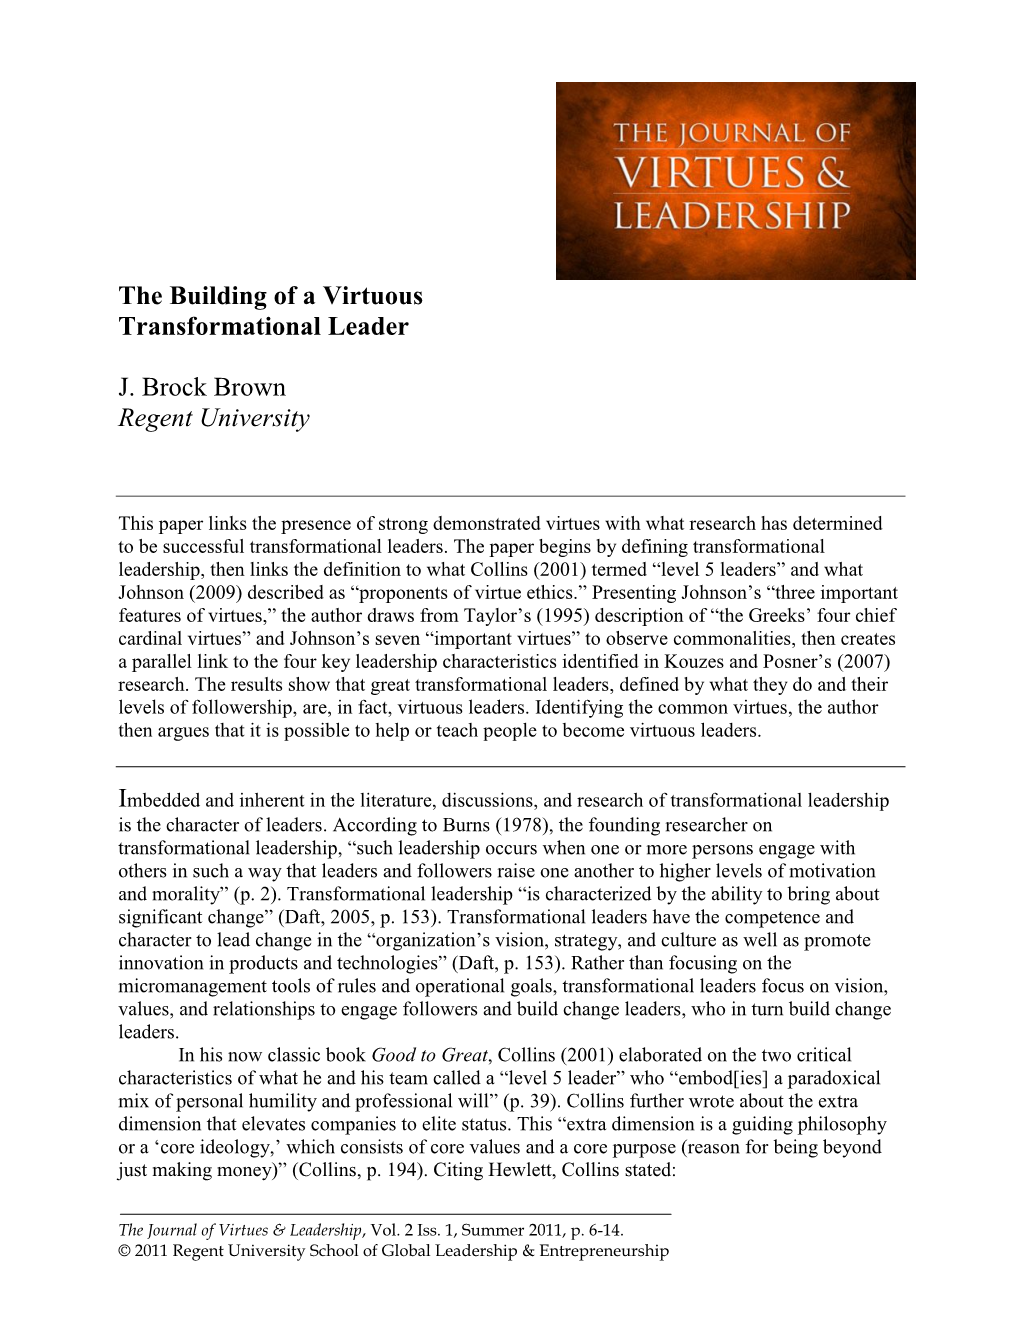 The Building of a Virtuous Transformational Leader